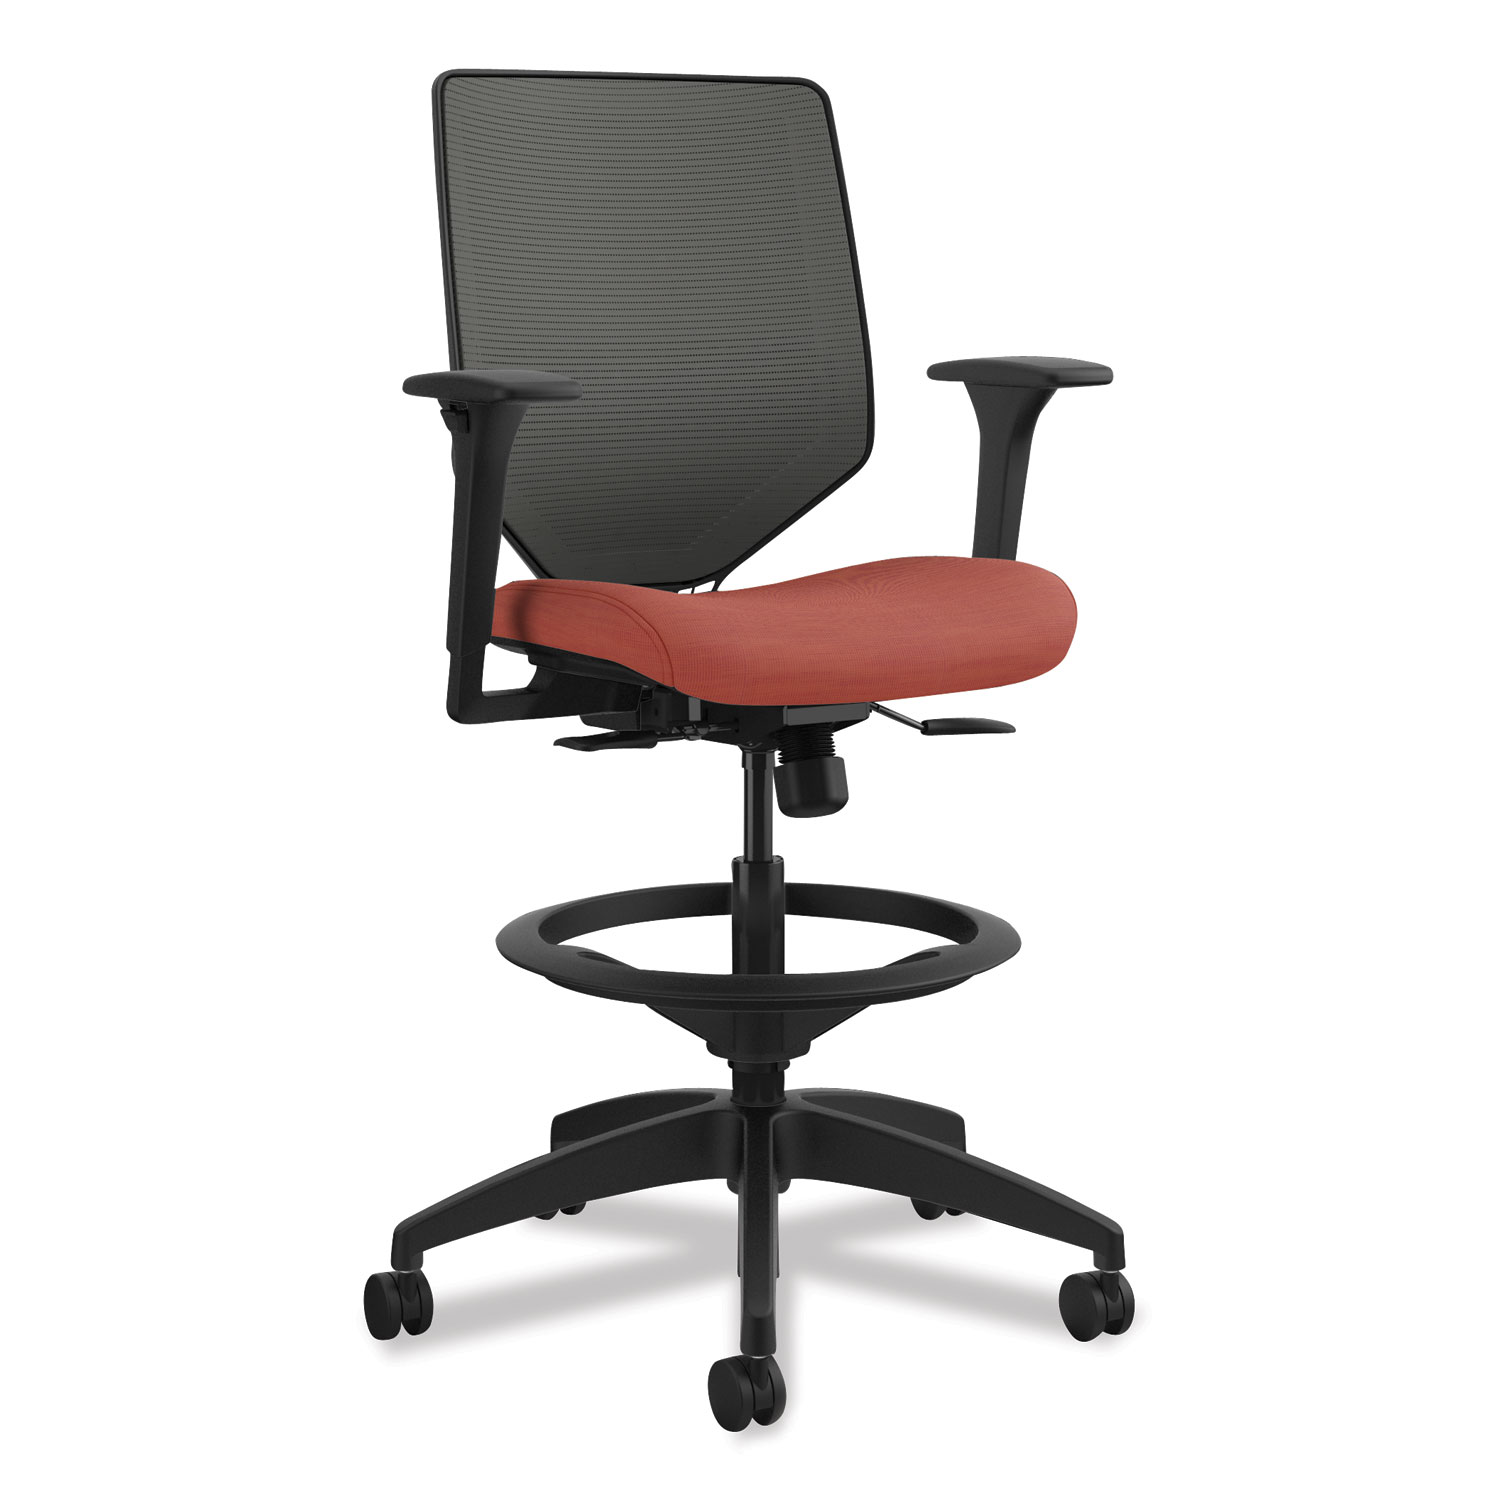  HON HONSVSM1AICC46T Solve Series Mesh Back Task Stool, Supports up to 300 lbs., Bittersweet Seat, Charcoal Back, Black Base (HONSVSM1AICC46T) 